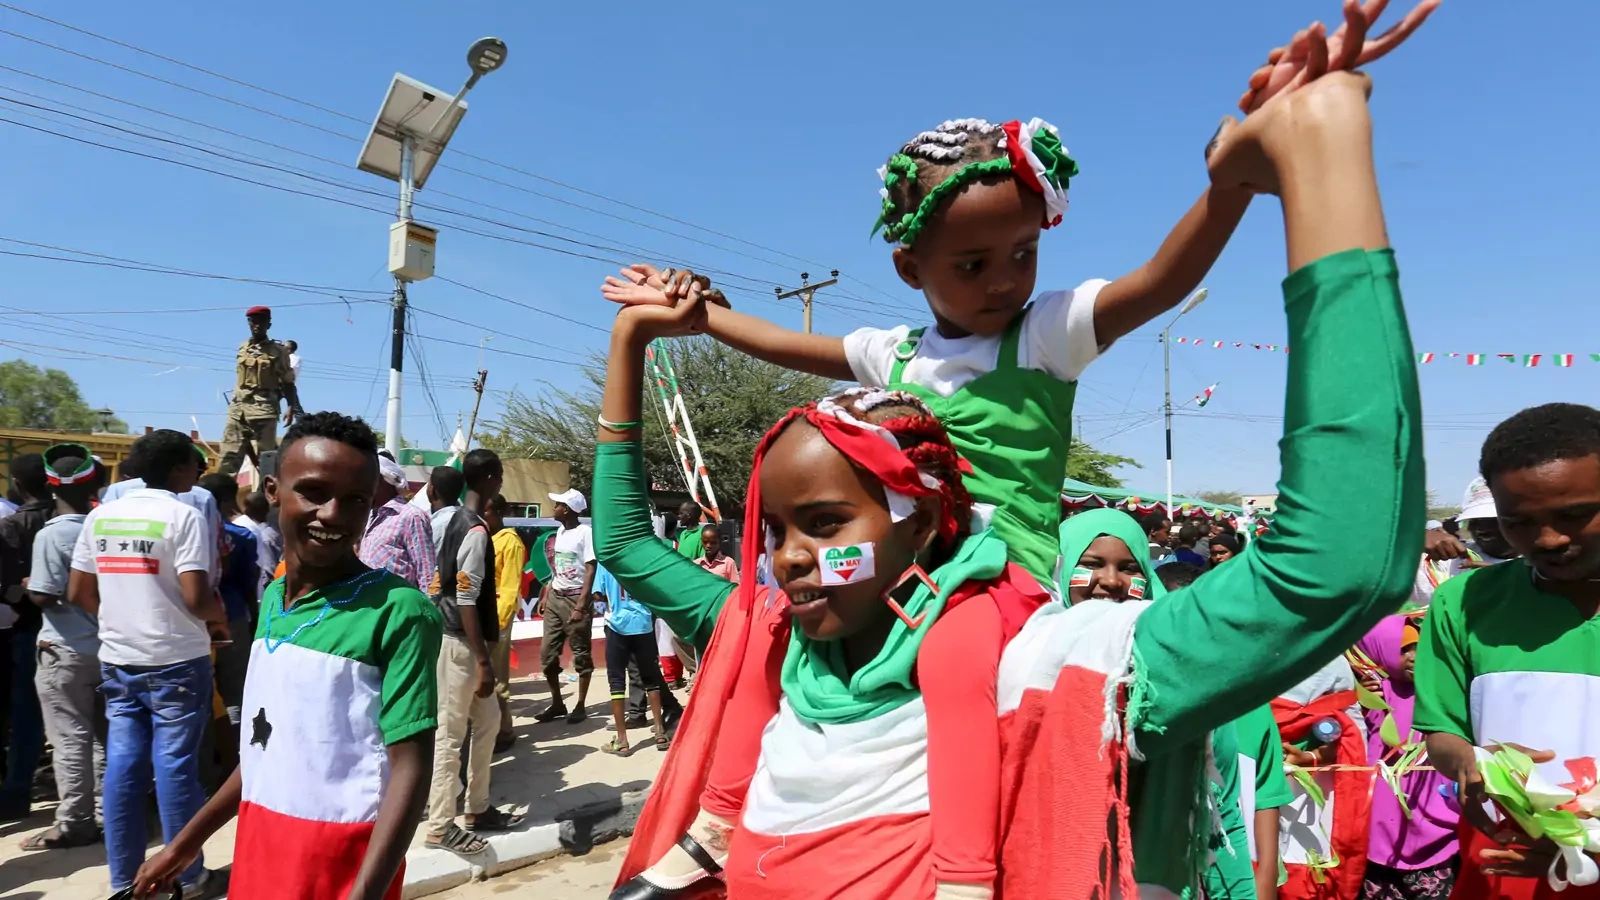 A girl participates in a street parade in Hargeisa to celebrate Somaliland’s self-declared independence.